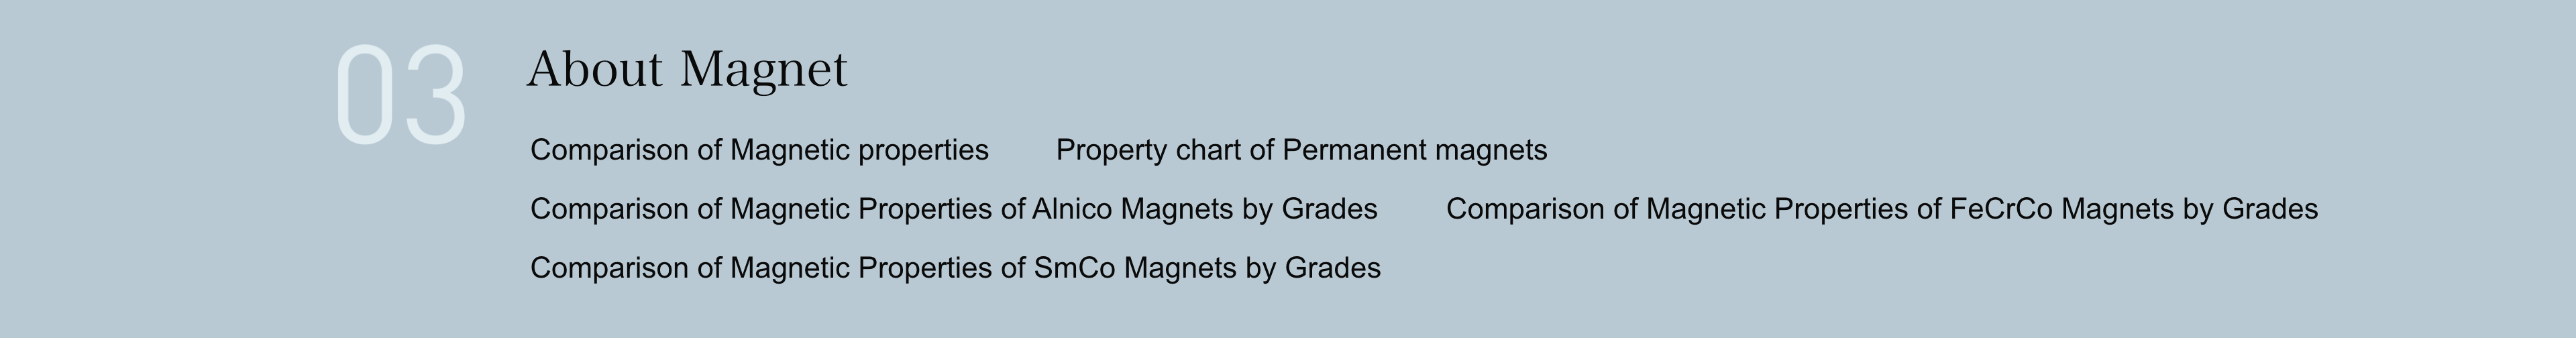 About Magnet